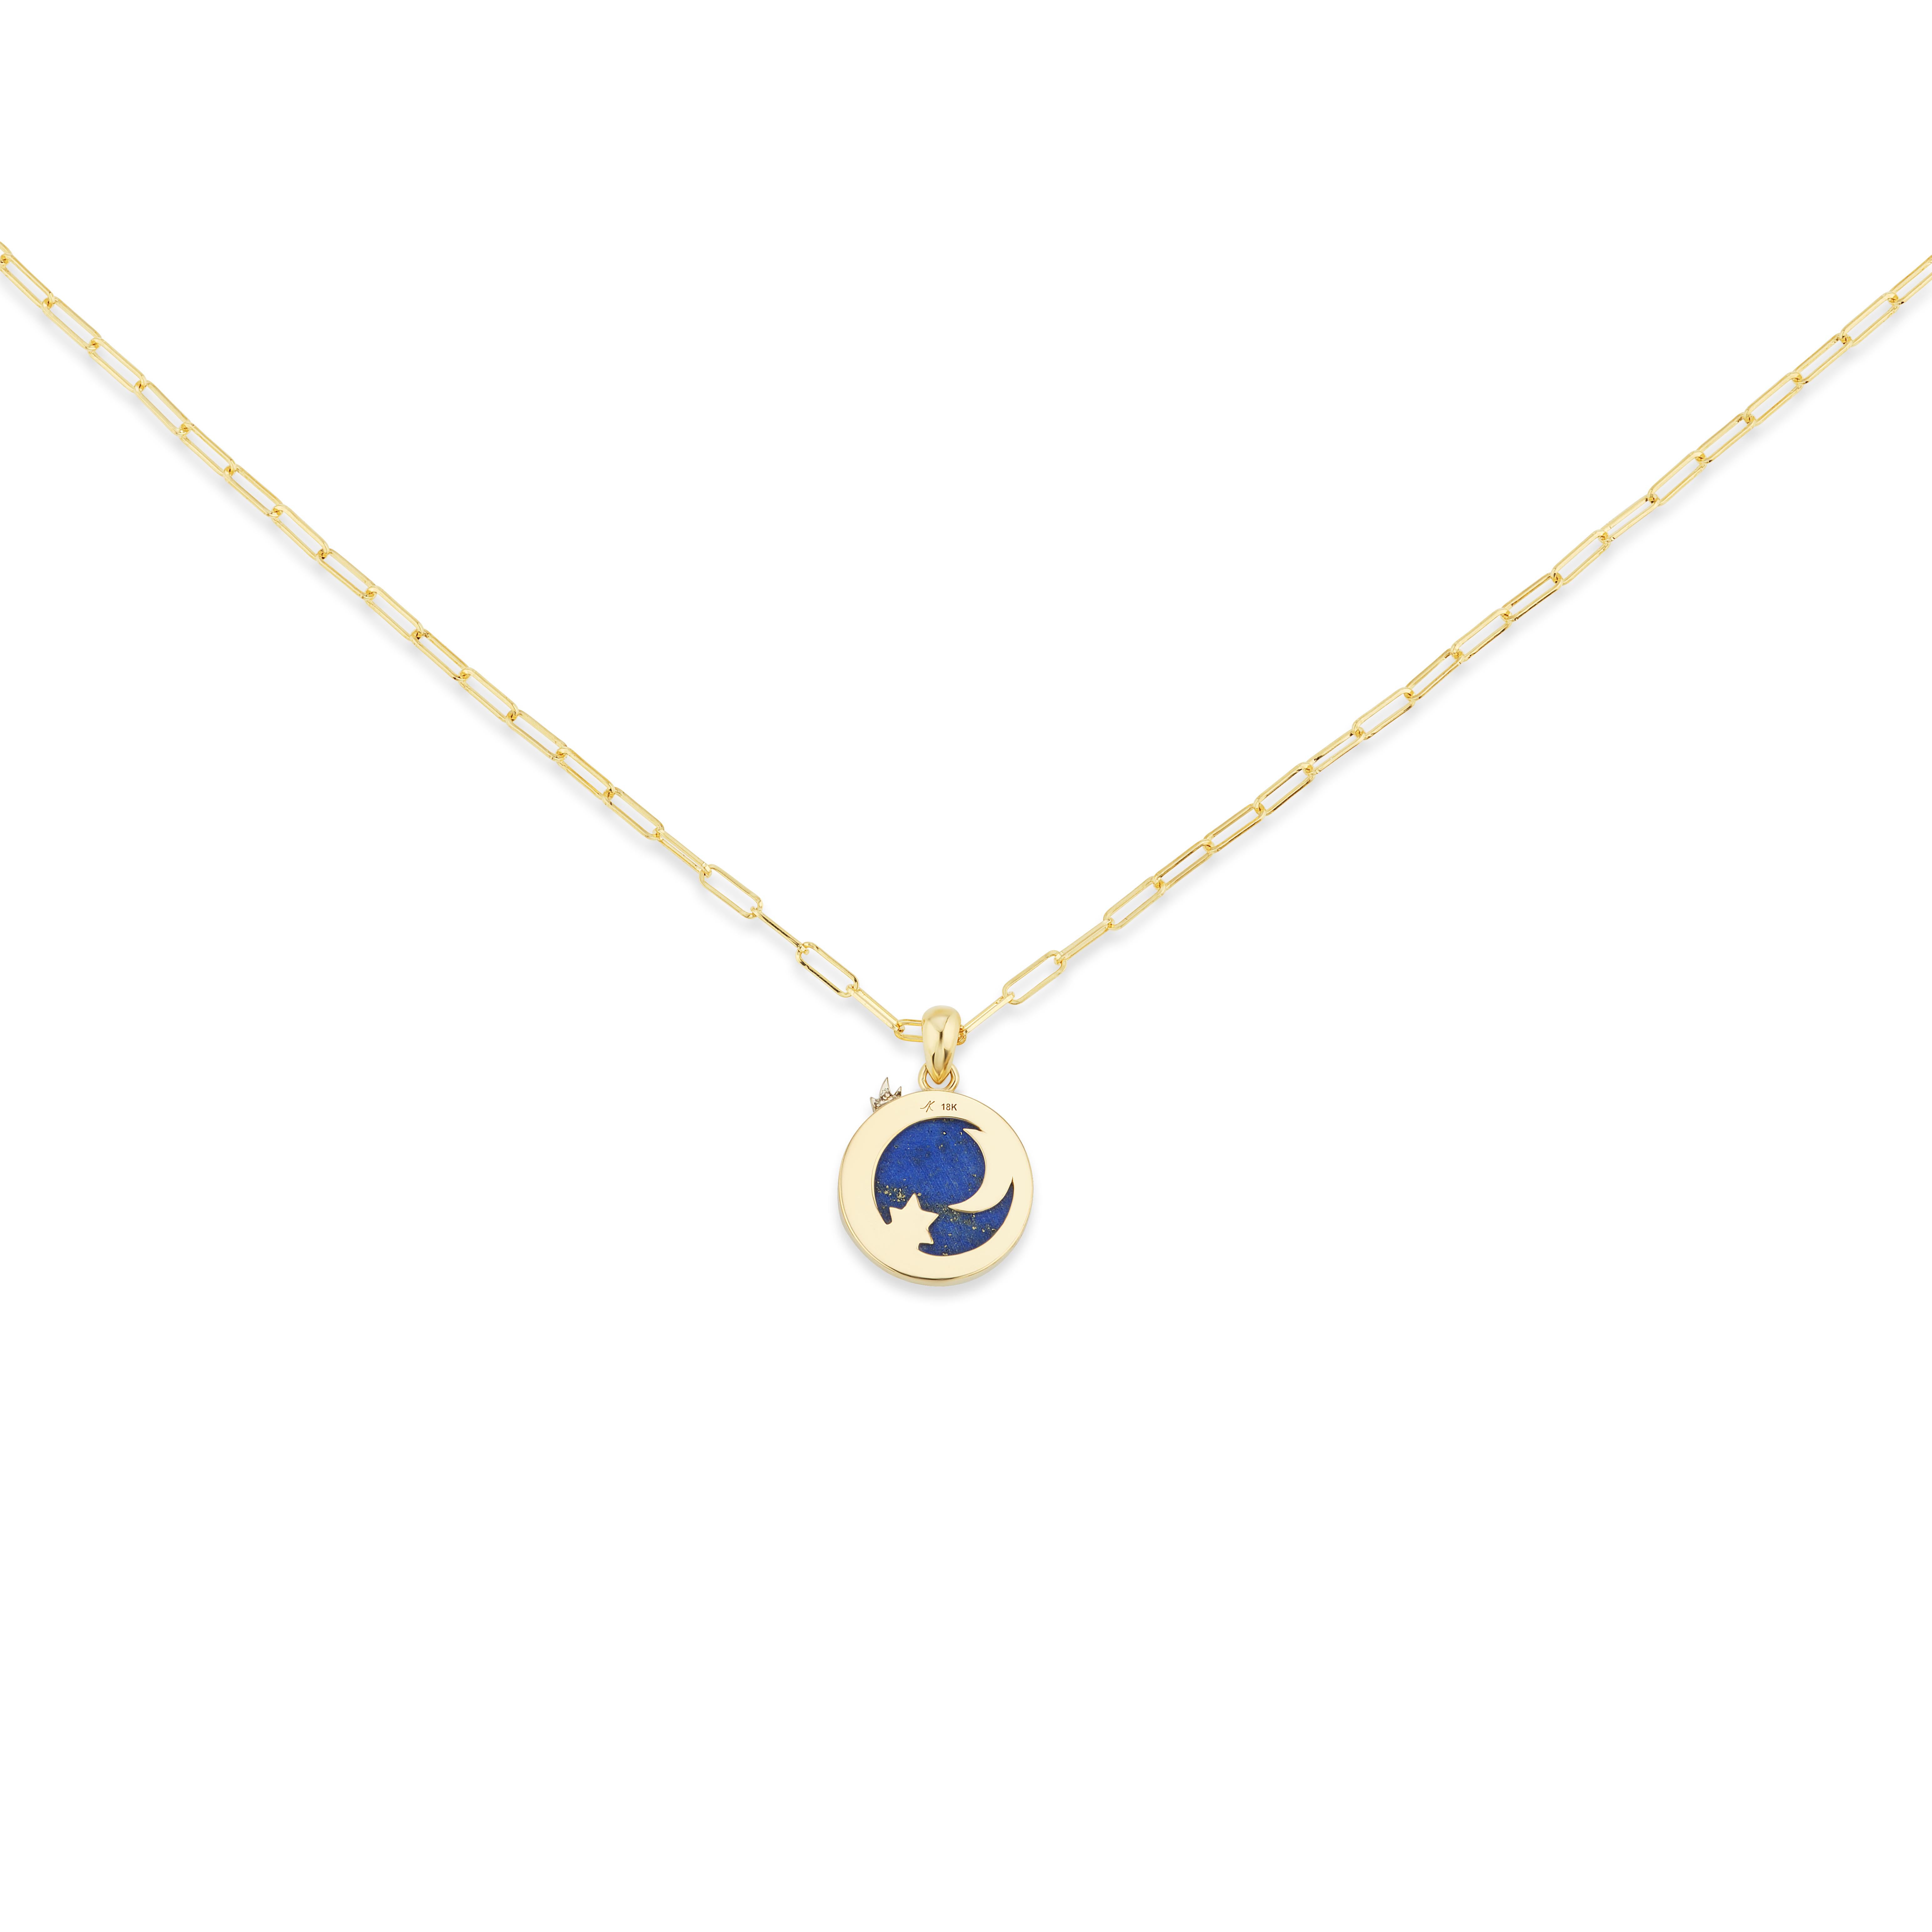 The Four Elements Air Pendant is a dazzling piece honoring both the visual and spiritual cosmos. A blue lapis lazuli ether is the background on which a luminous crescent moon and stars sparkle in yellow gold and pave diamonds. A radiant white gold